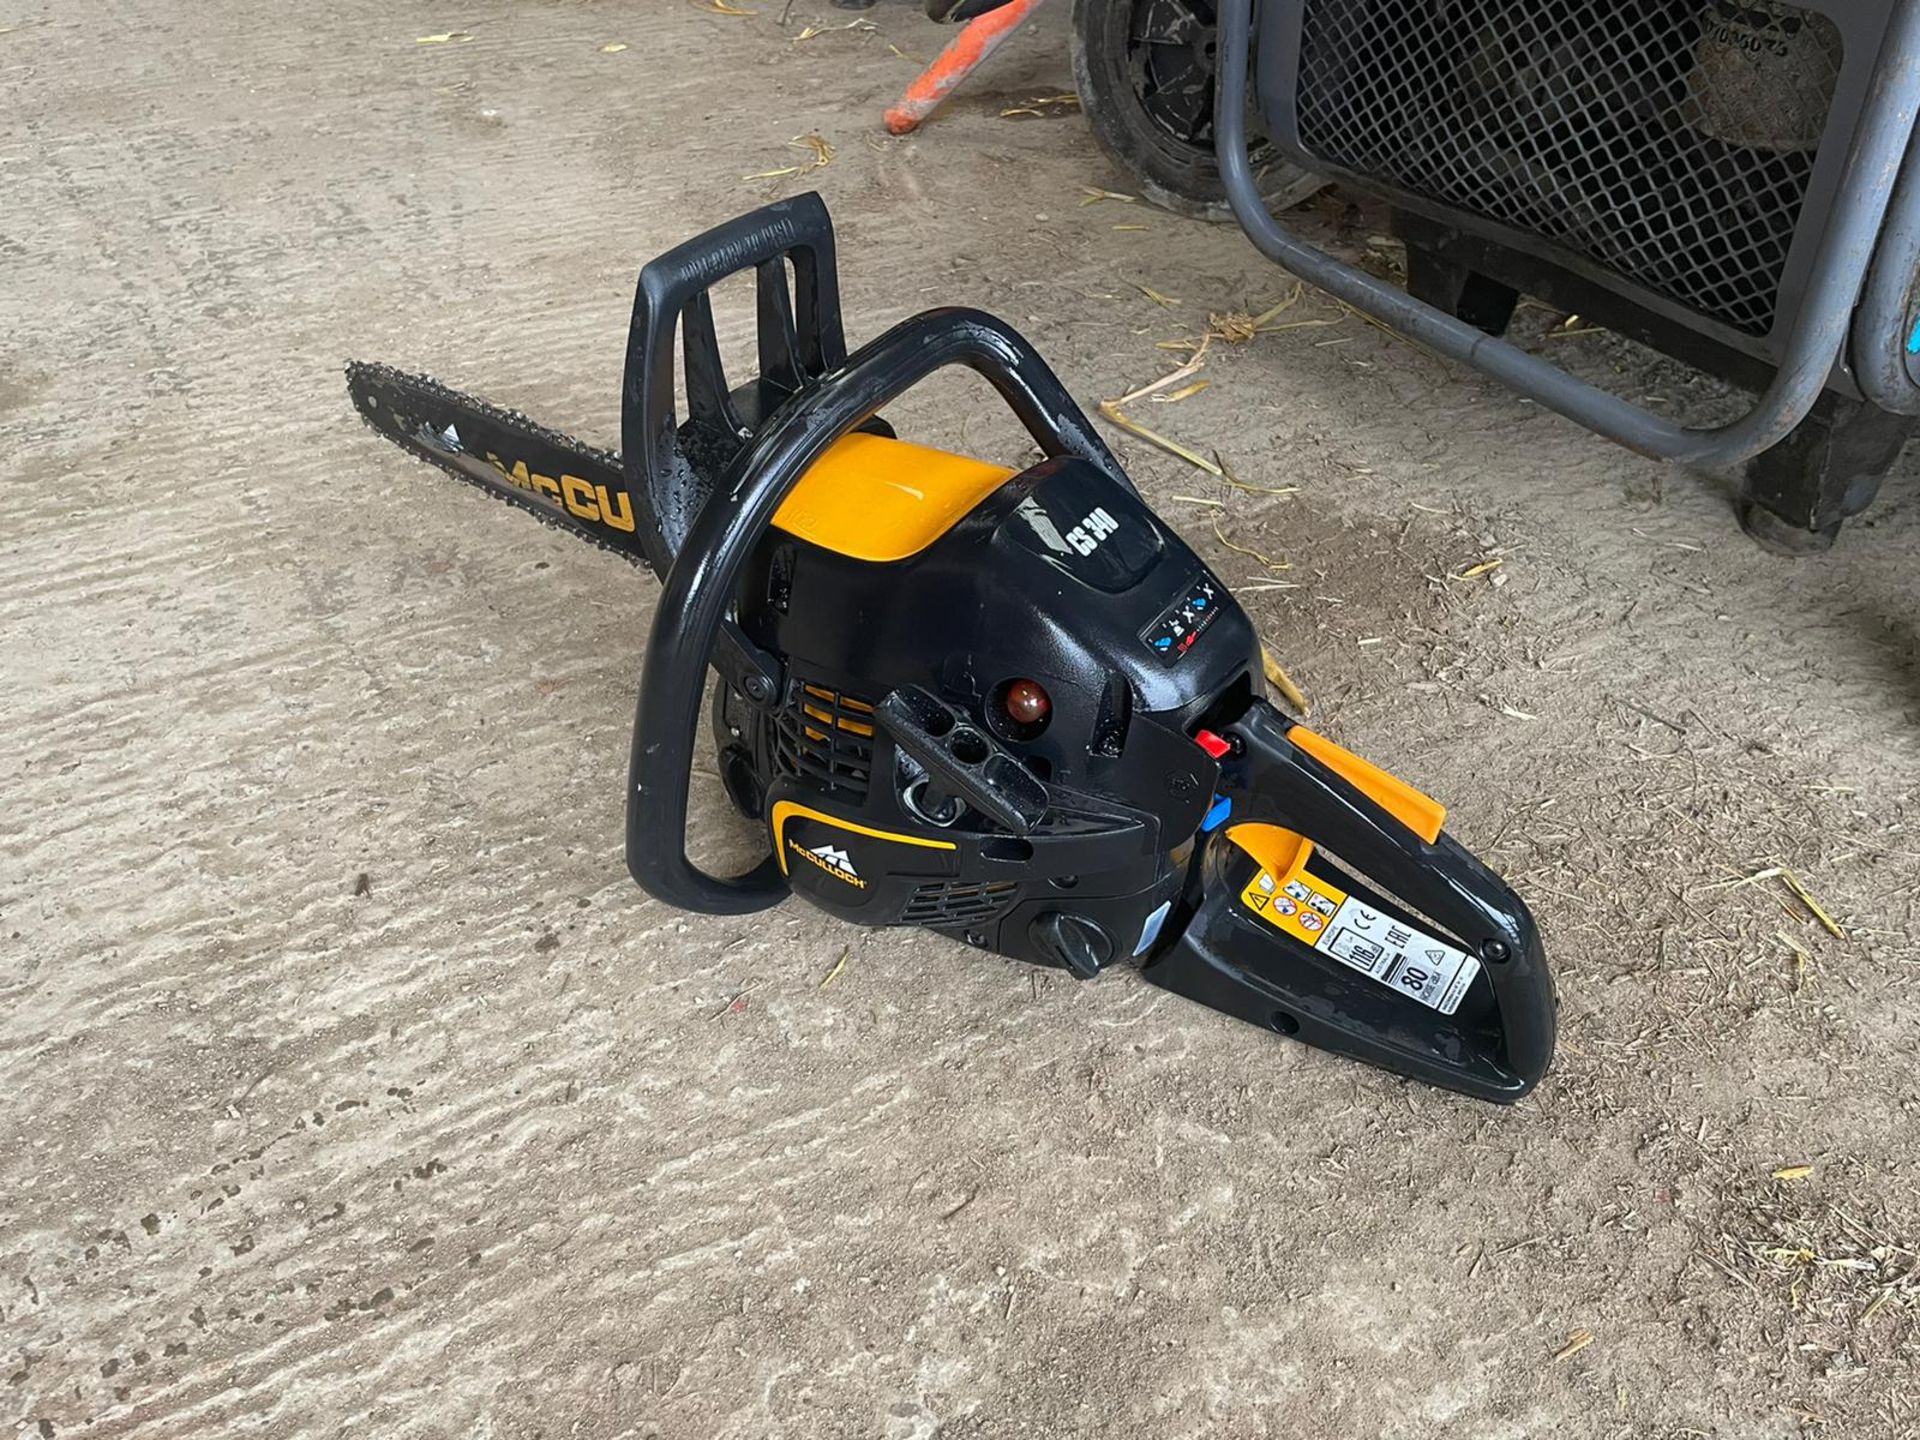 2018 McCULLOCH CS340 CHAINSAW, MADE BY HUSQVARNA, RUNS AND WORKS, 16" BAR AND CHAIN *NO VAT* - Image 4 of 5